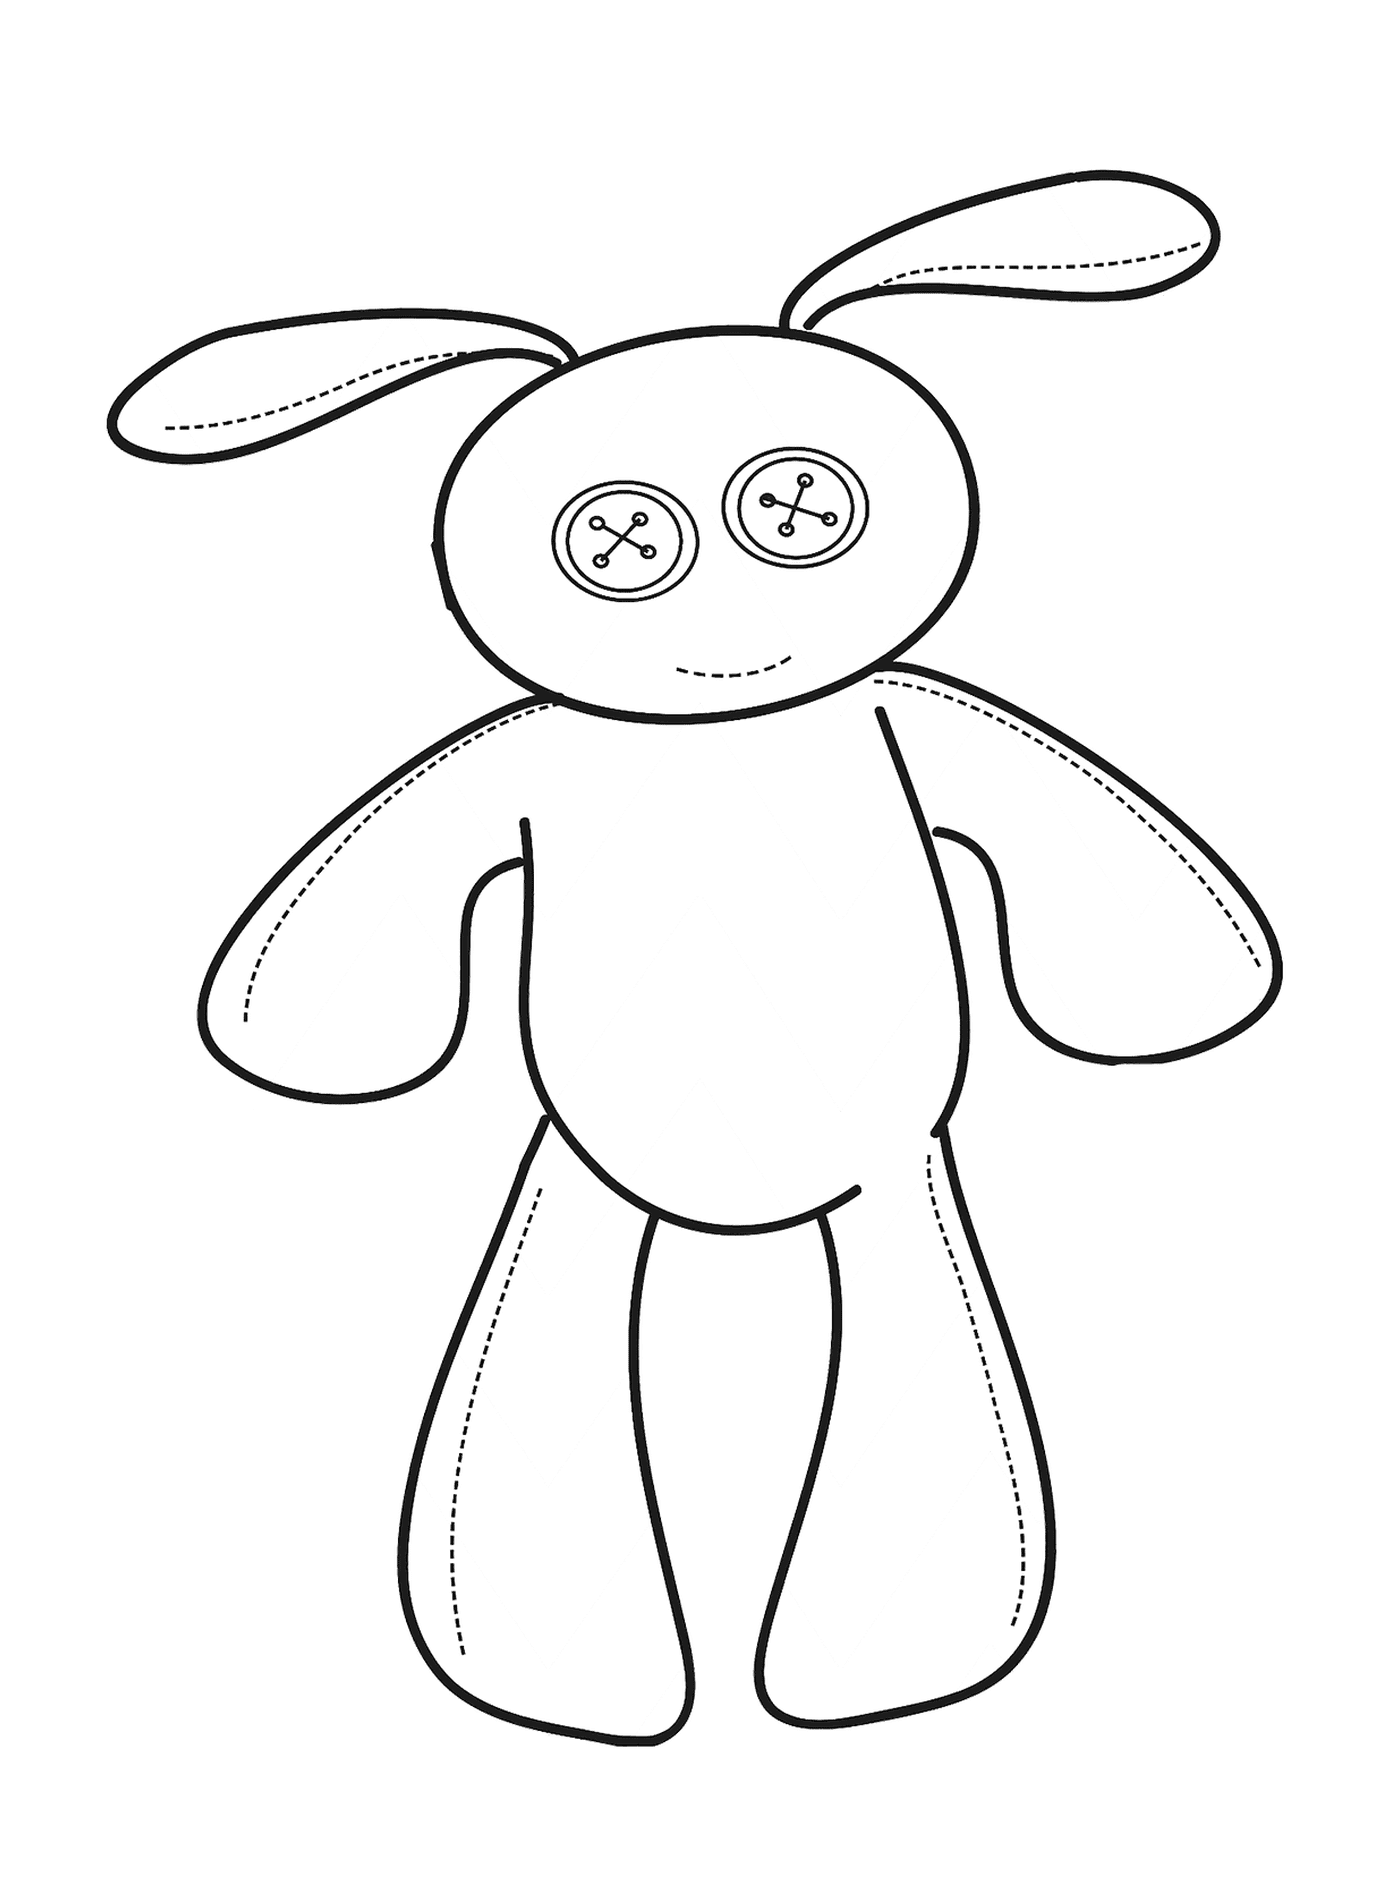  Teddy RabbitCity name (optional, probably does not need a translation) 